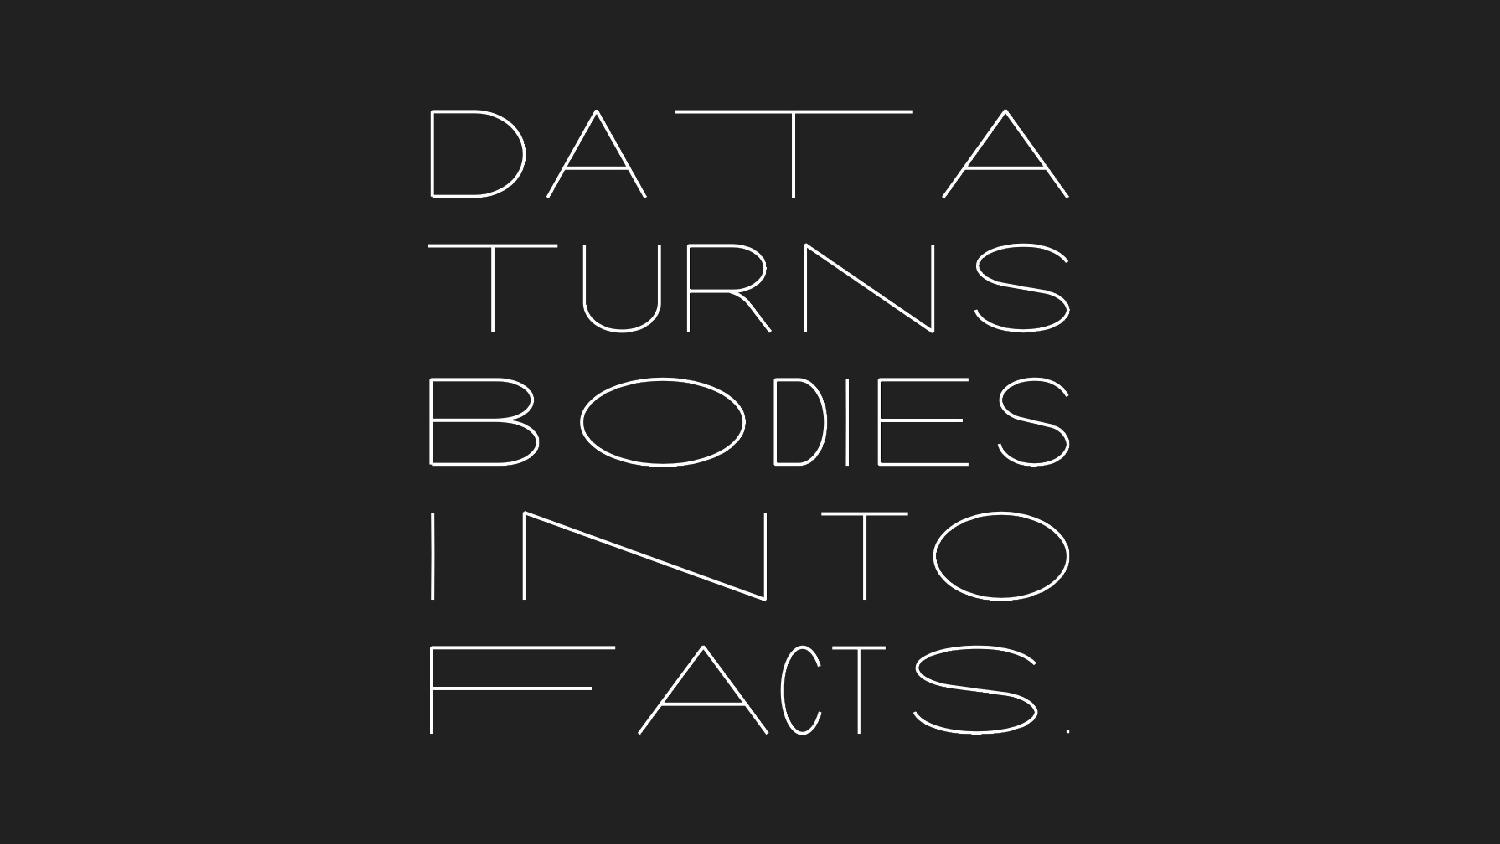 The words 'Data Turns Bodies Into Facts' are typeset in Biometric Sans, a typeface that stretches letters based on typing speed.